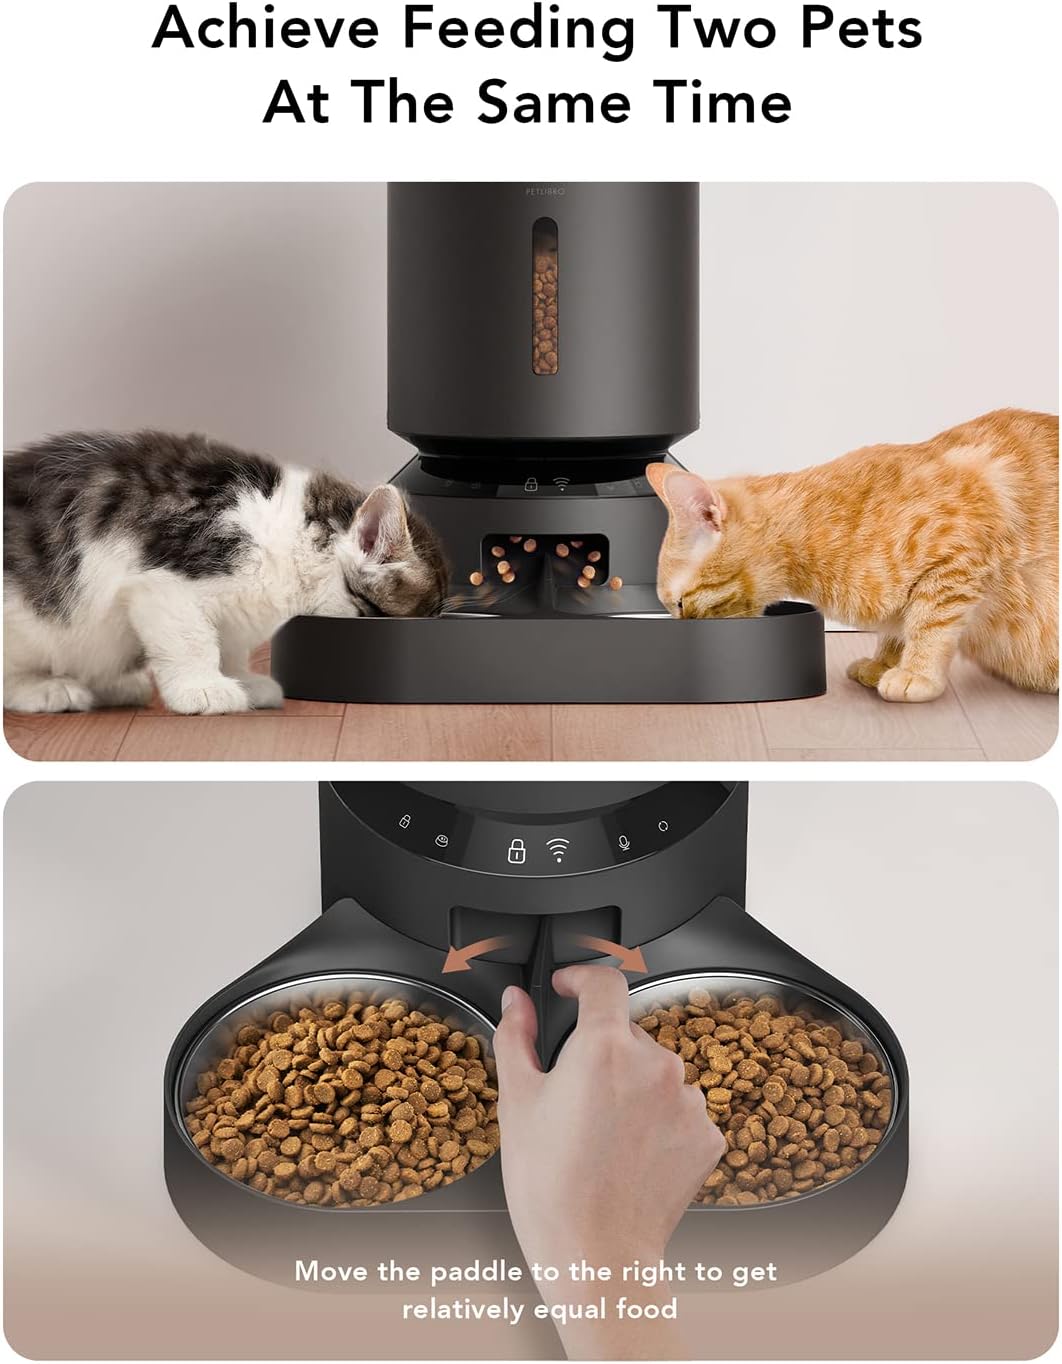 PETLIBRO Automatic Cat Food Dispenser, 5G WiFi Pet Feeder with APP Control for Pet Dry Food 1-10 Meal